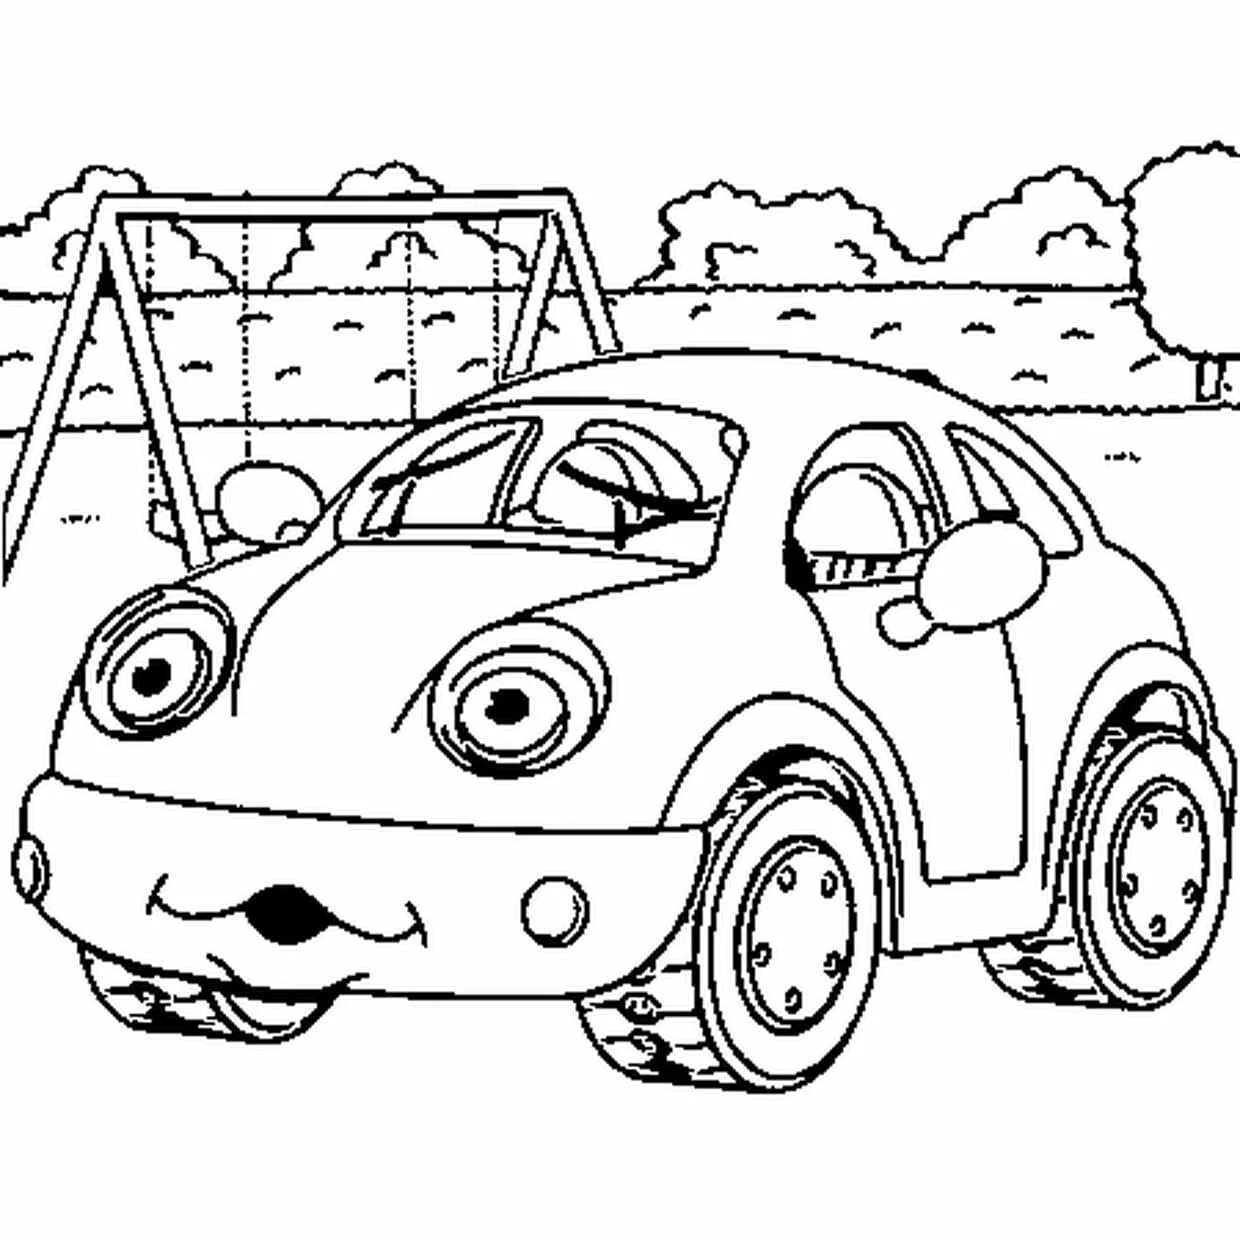 Coloring book shiny cars for boys